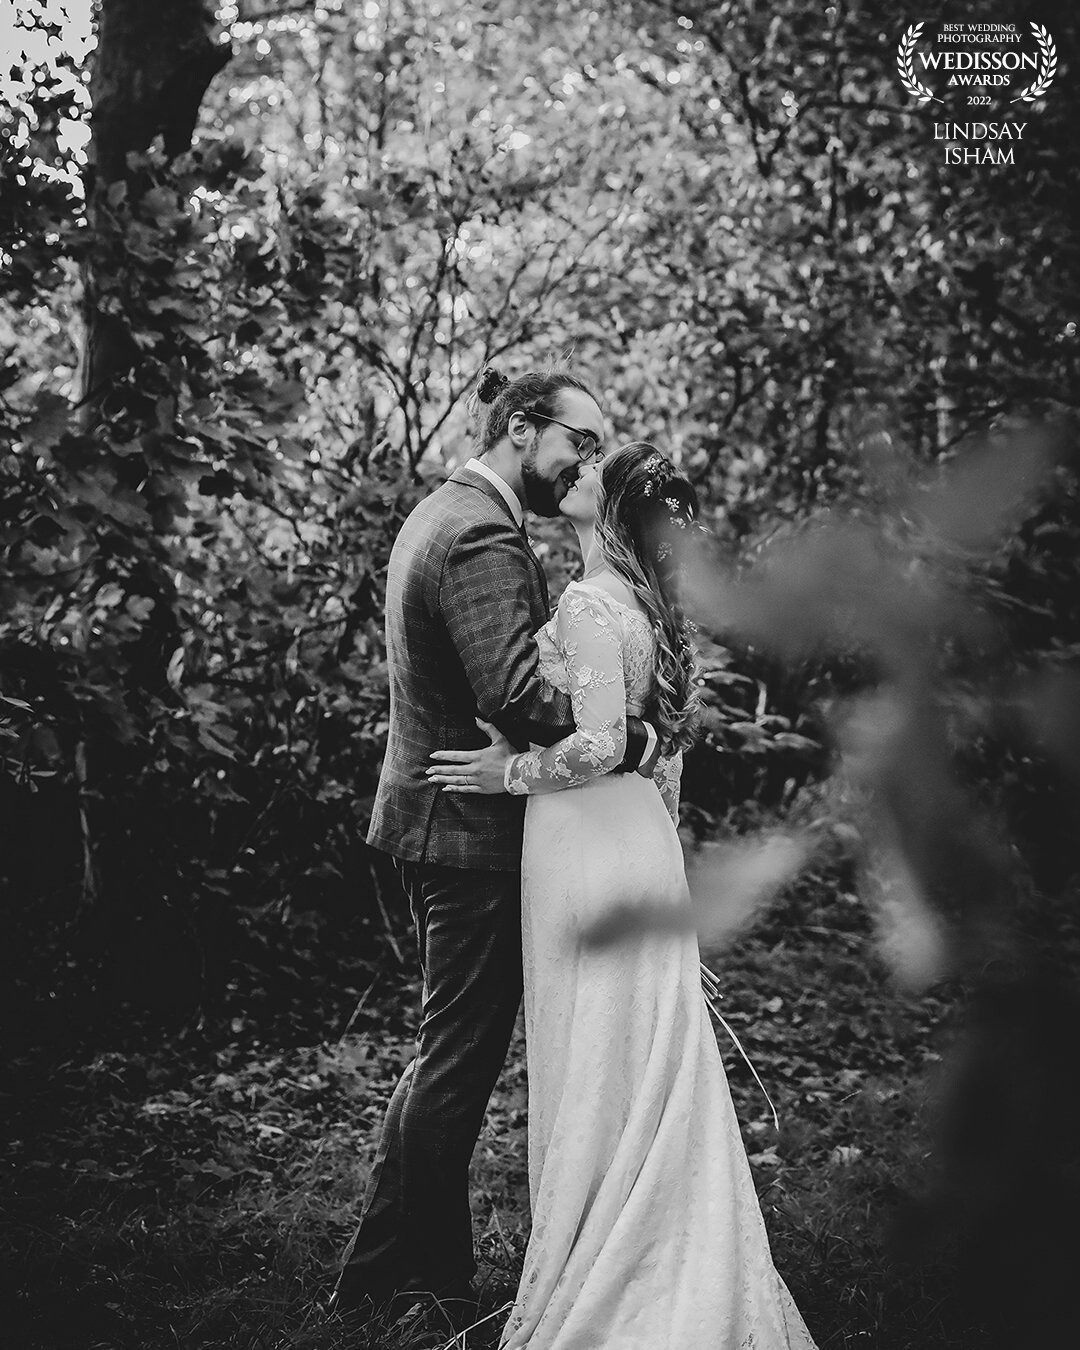 Captured at Scrivelsby Walled Garden, Selina & Ryan had an intimate, humanist ceremony.  Their day was simply perfect and here is a tender moment between the two of them.  I just love this black and white beauty!